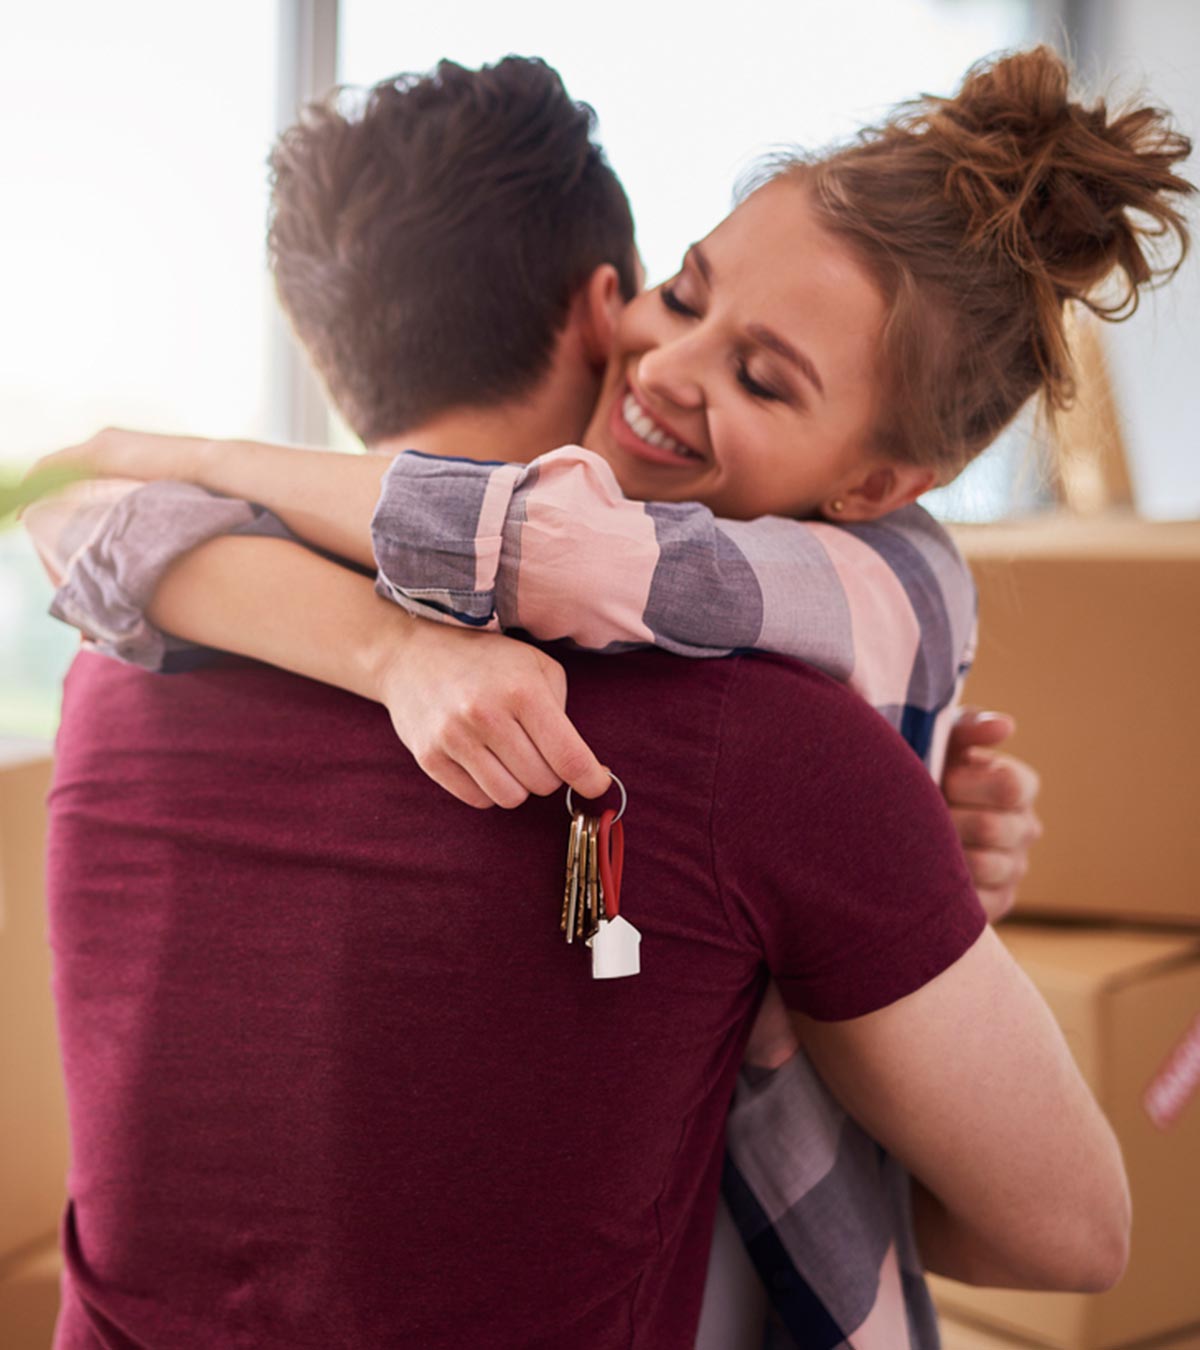 13+ Clear Signs You're Ready To Move In Together